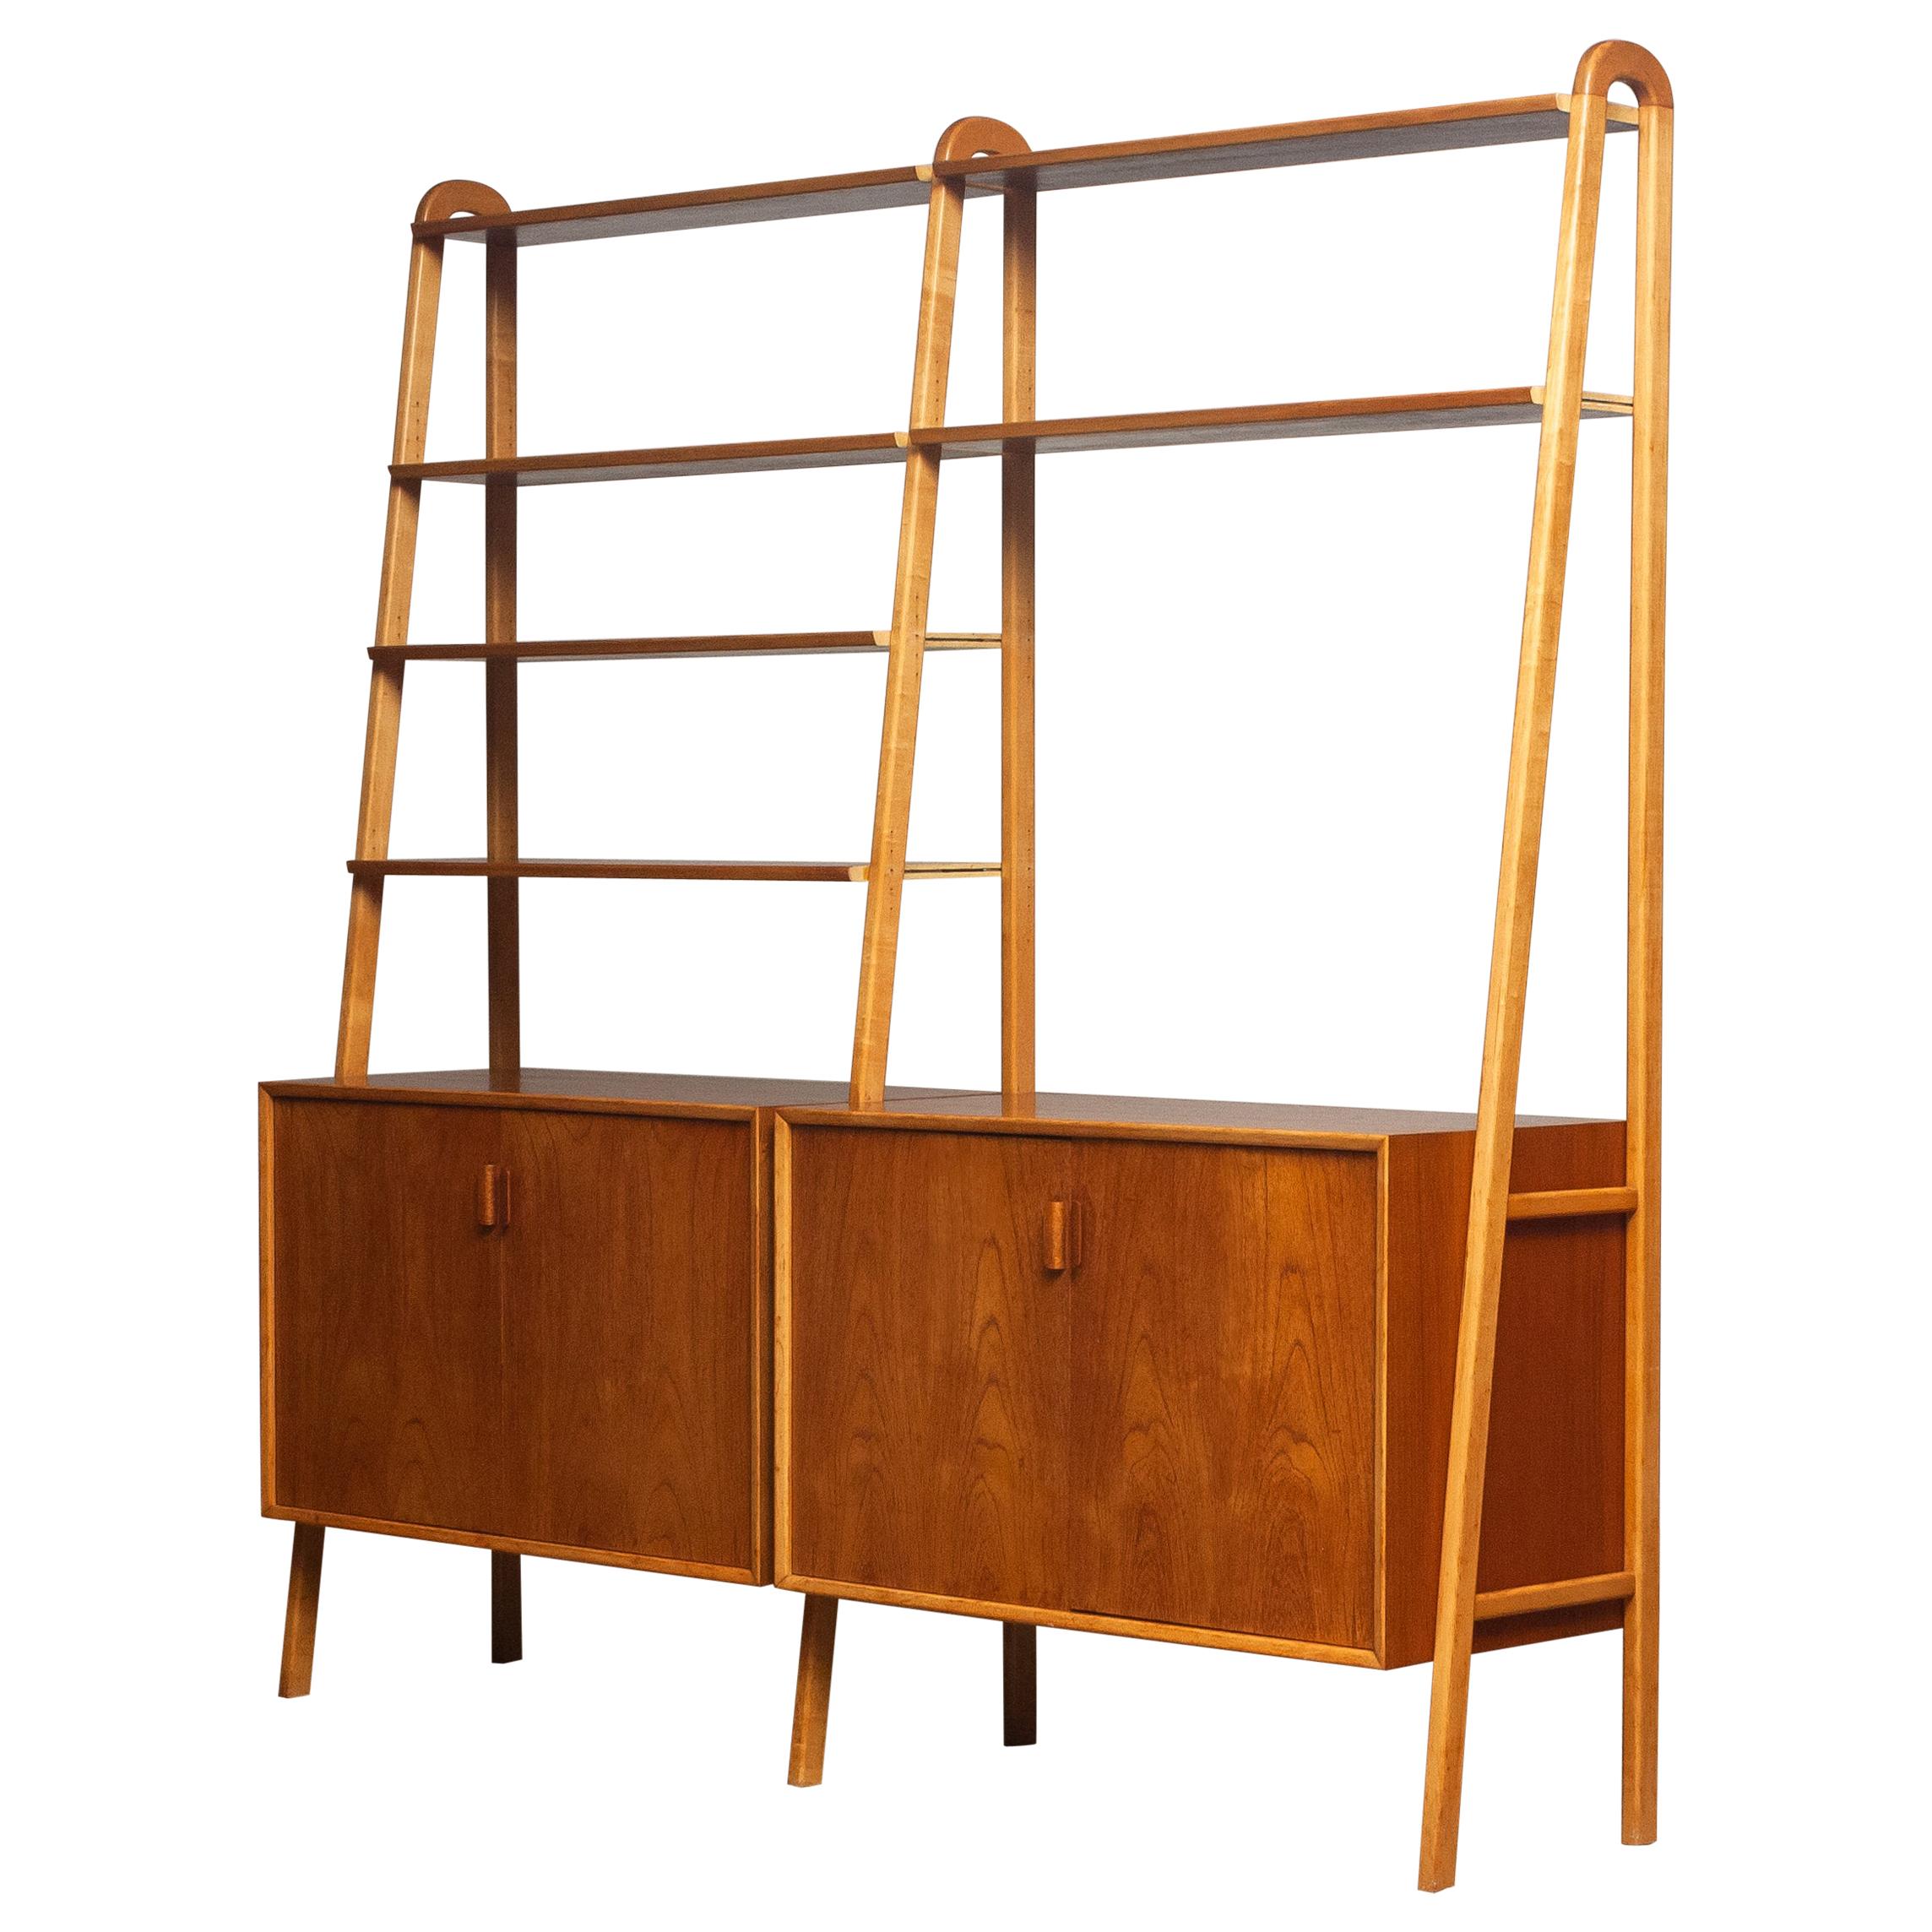 Beautiful and typical Swedish bookcase / shelfs cabinet in teak in combination with beech stands made by Brantorps, Sweden.
This cabinet consists six shelfs in which four are adjustable. The two on the top are fixed.
Two cabinets and also both